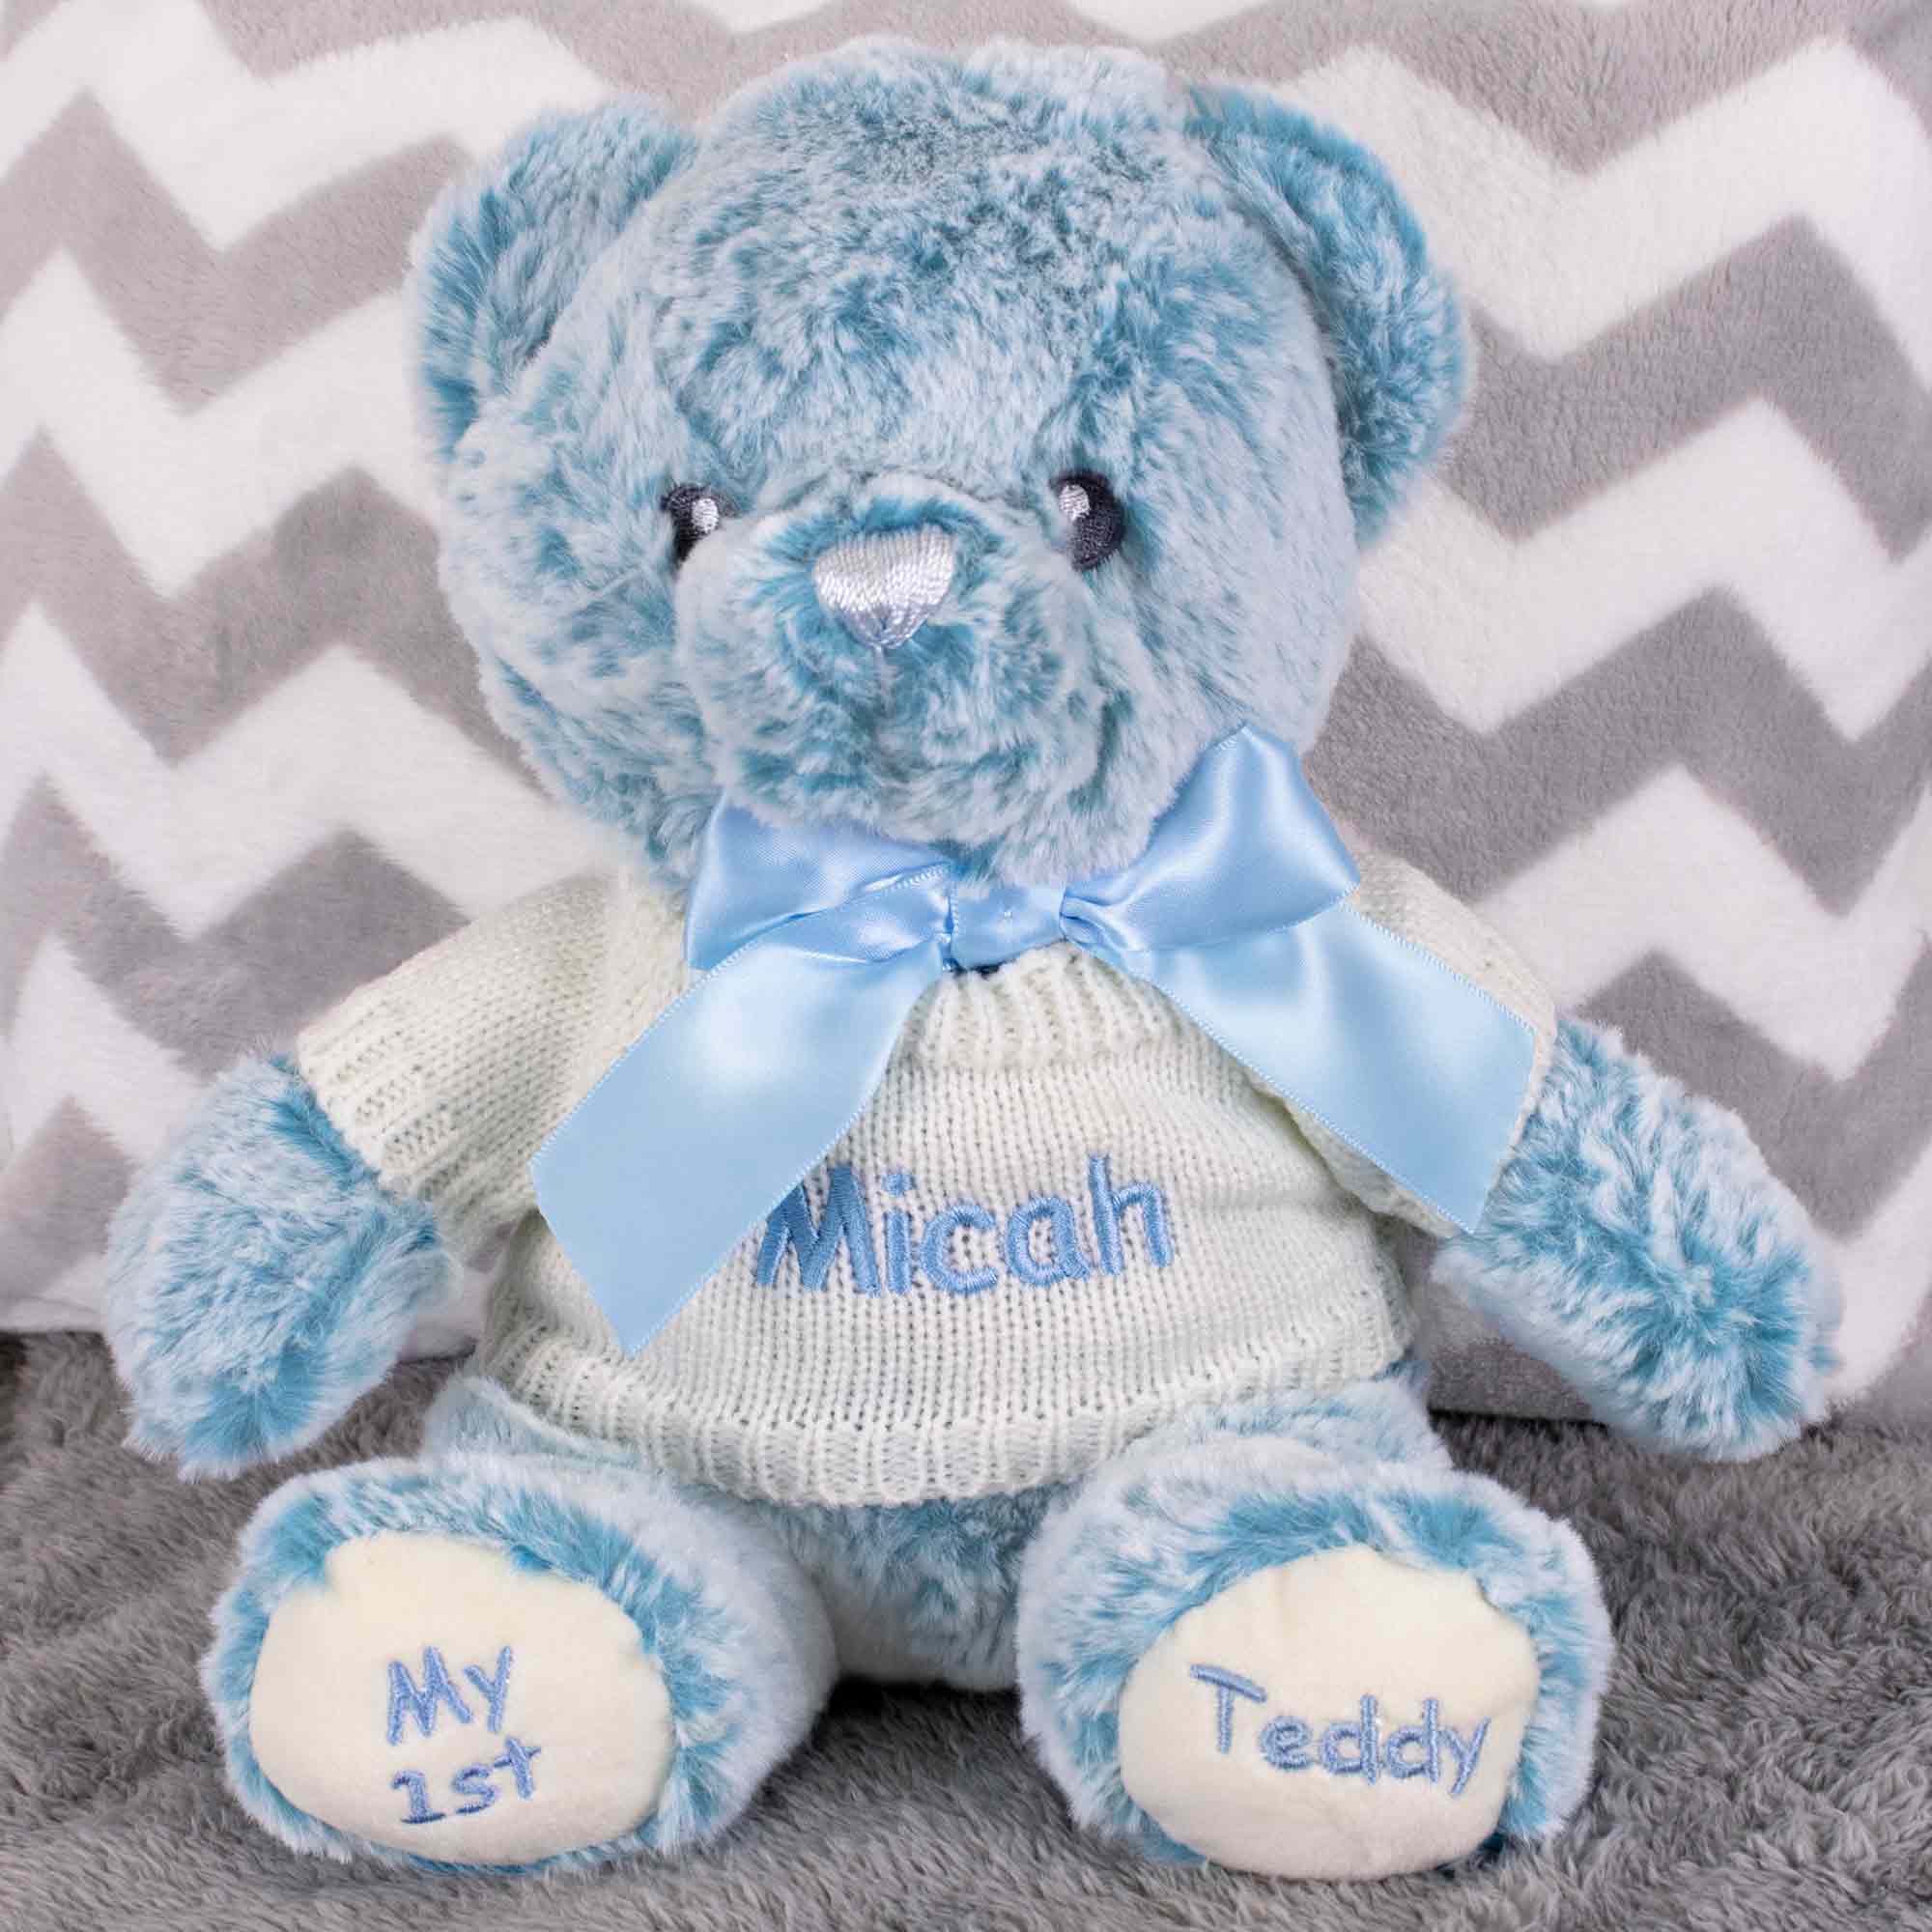 Personalized Baby Gift - Baby’s First Teddy Bear - Blue, 12 Inch